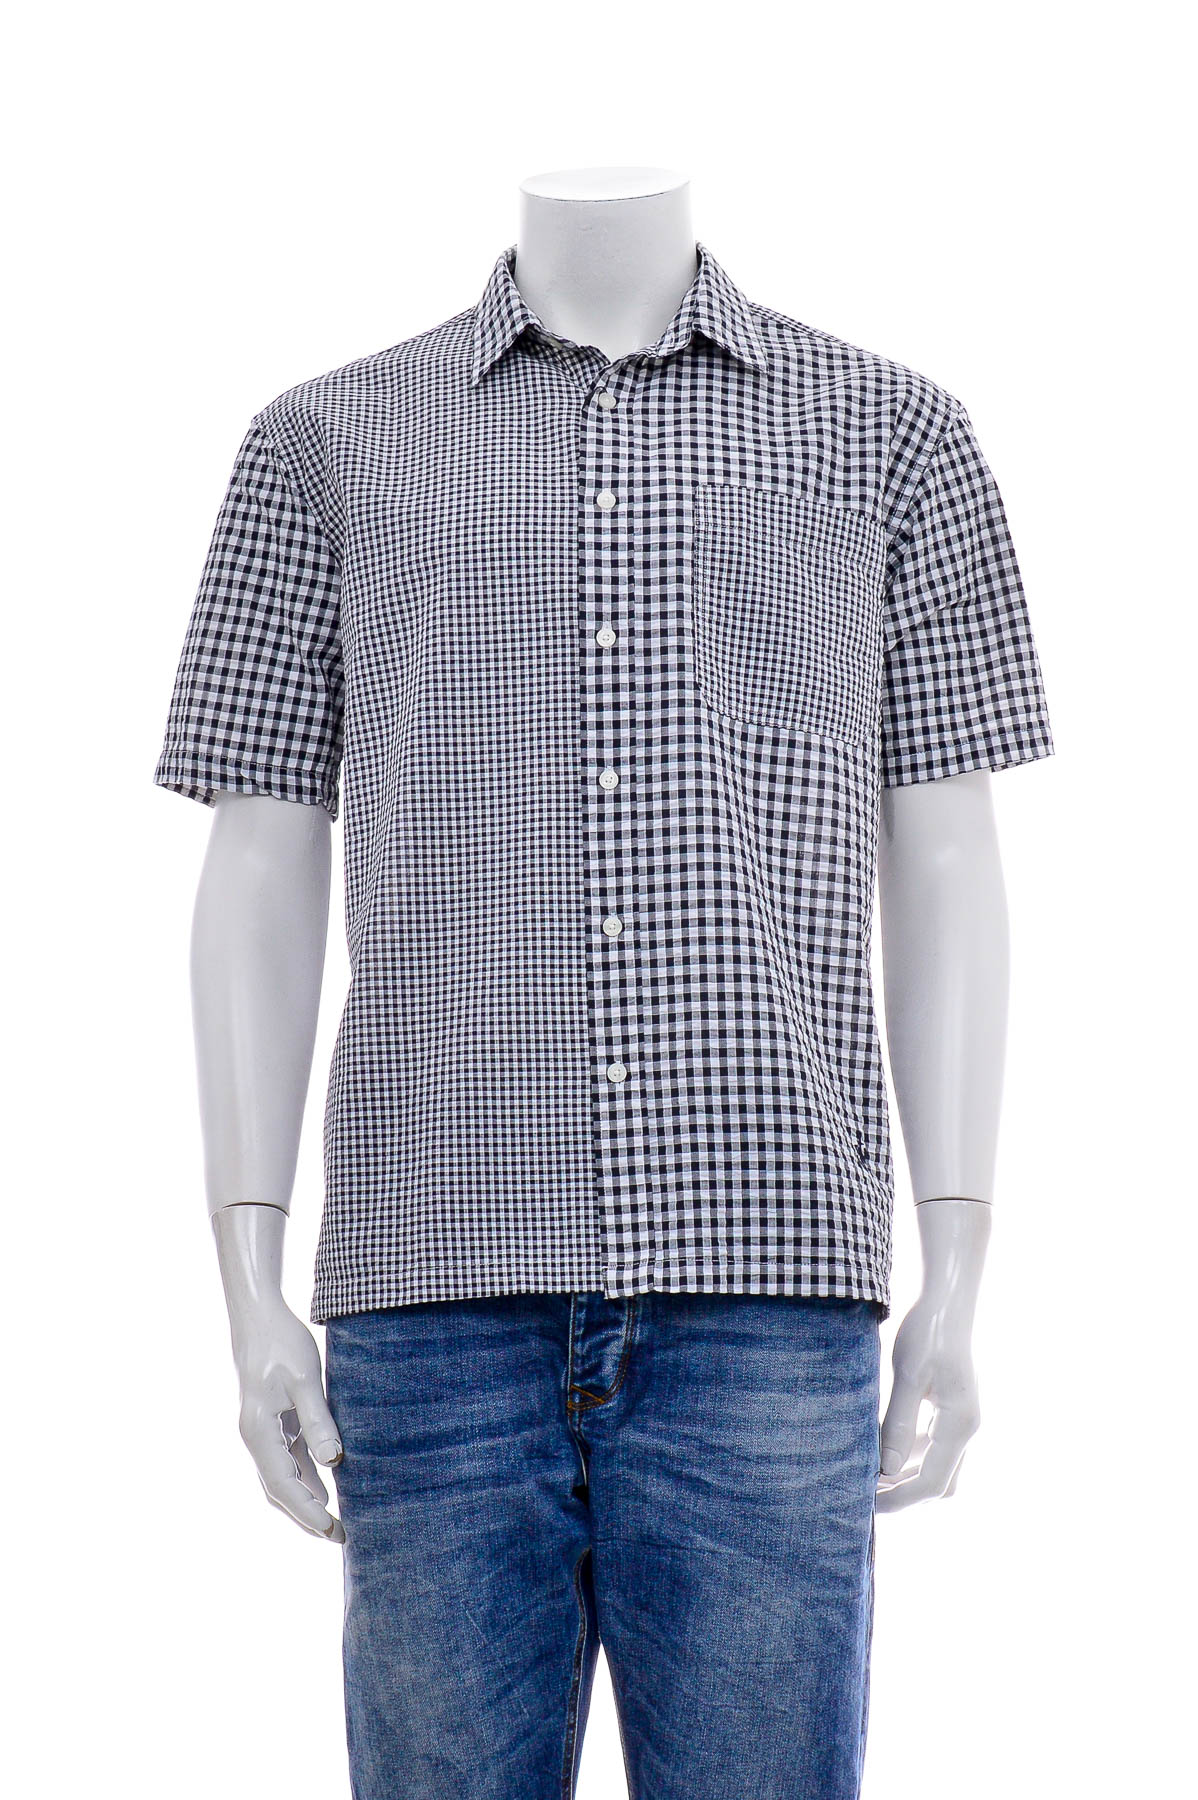 Men's shirt - JW ANDERSON and UNIQLO - 0